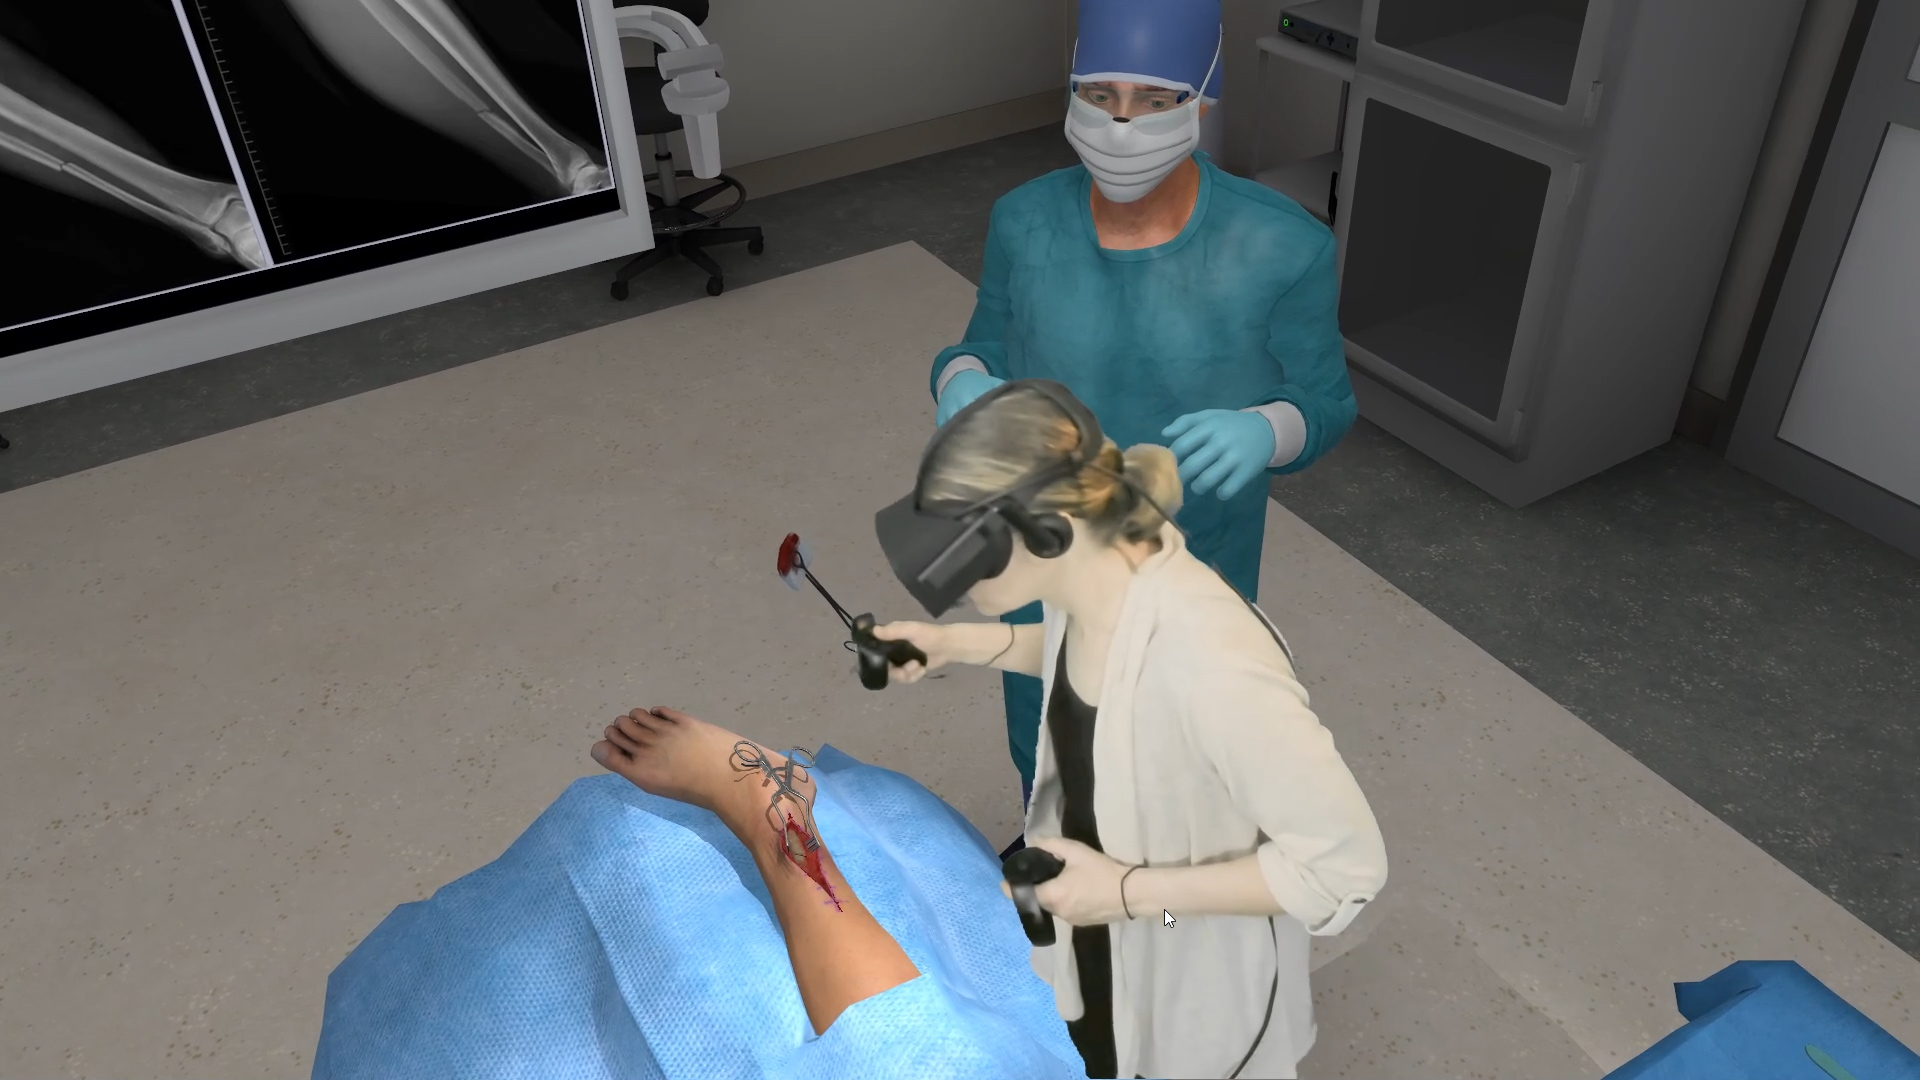 Vr Bone Facture Reduction Arch Virtual Vr Training And Simulation For Education And Enterprise 